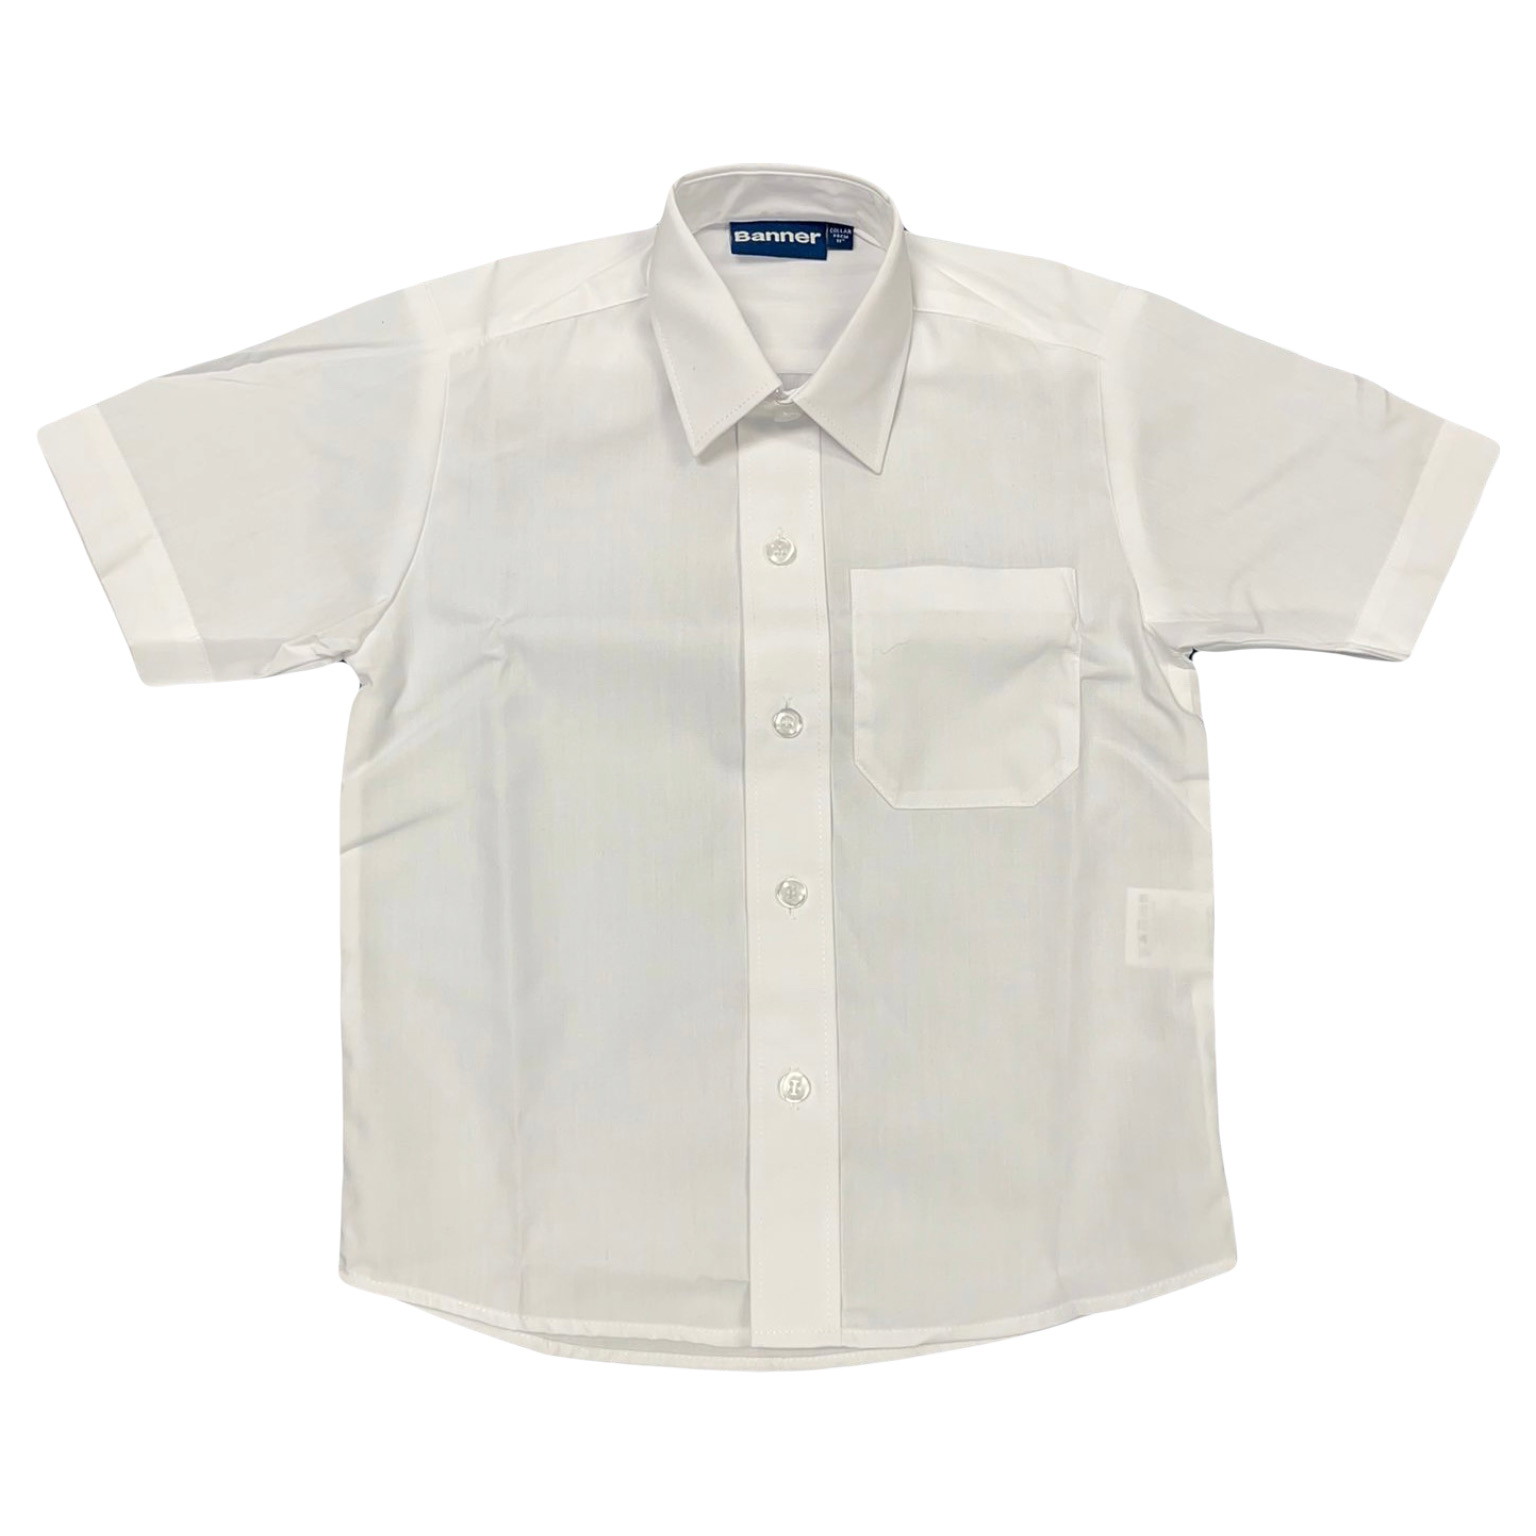 Chatham and Clarendon Short Sleeve Shirt – 2 pack